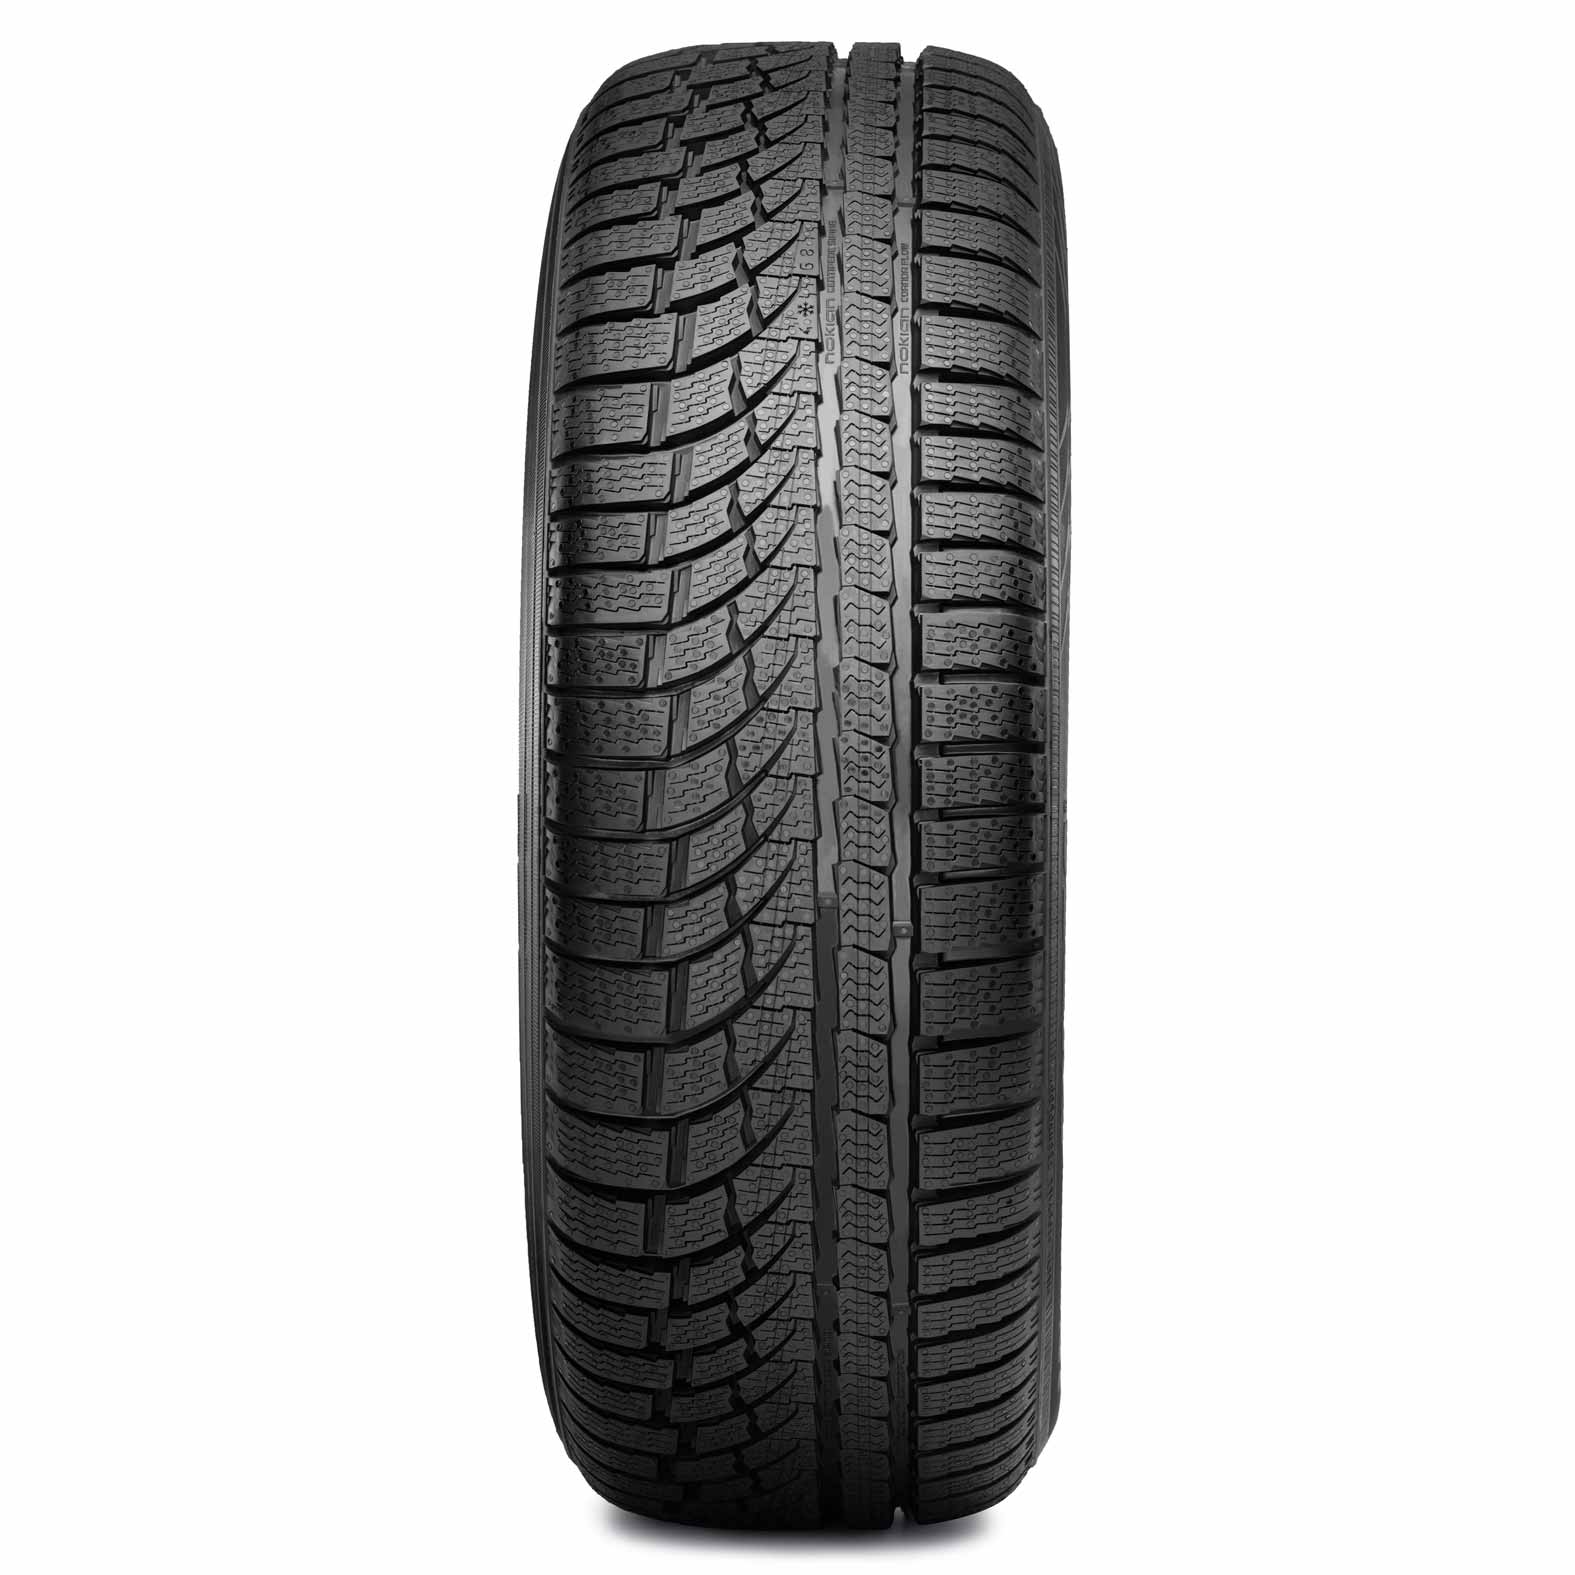 WRG4 Kal Tire | Nokian All-Weather Tires for